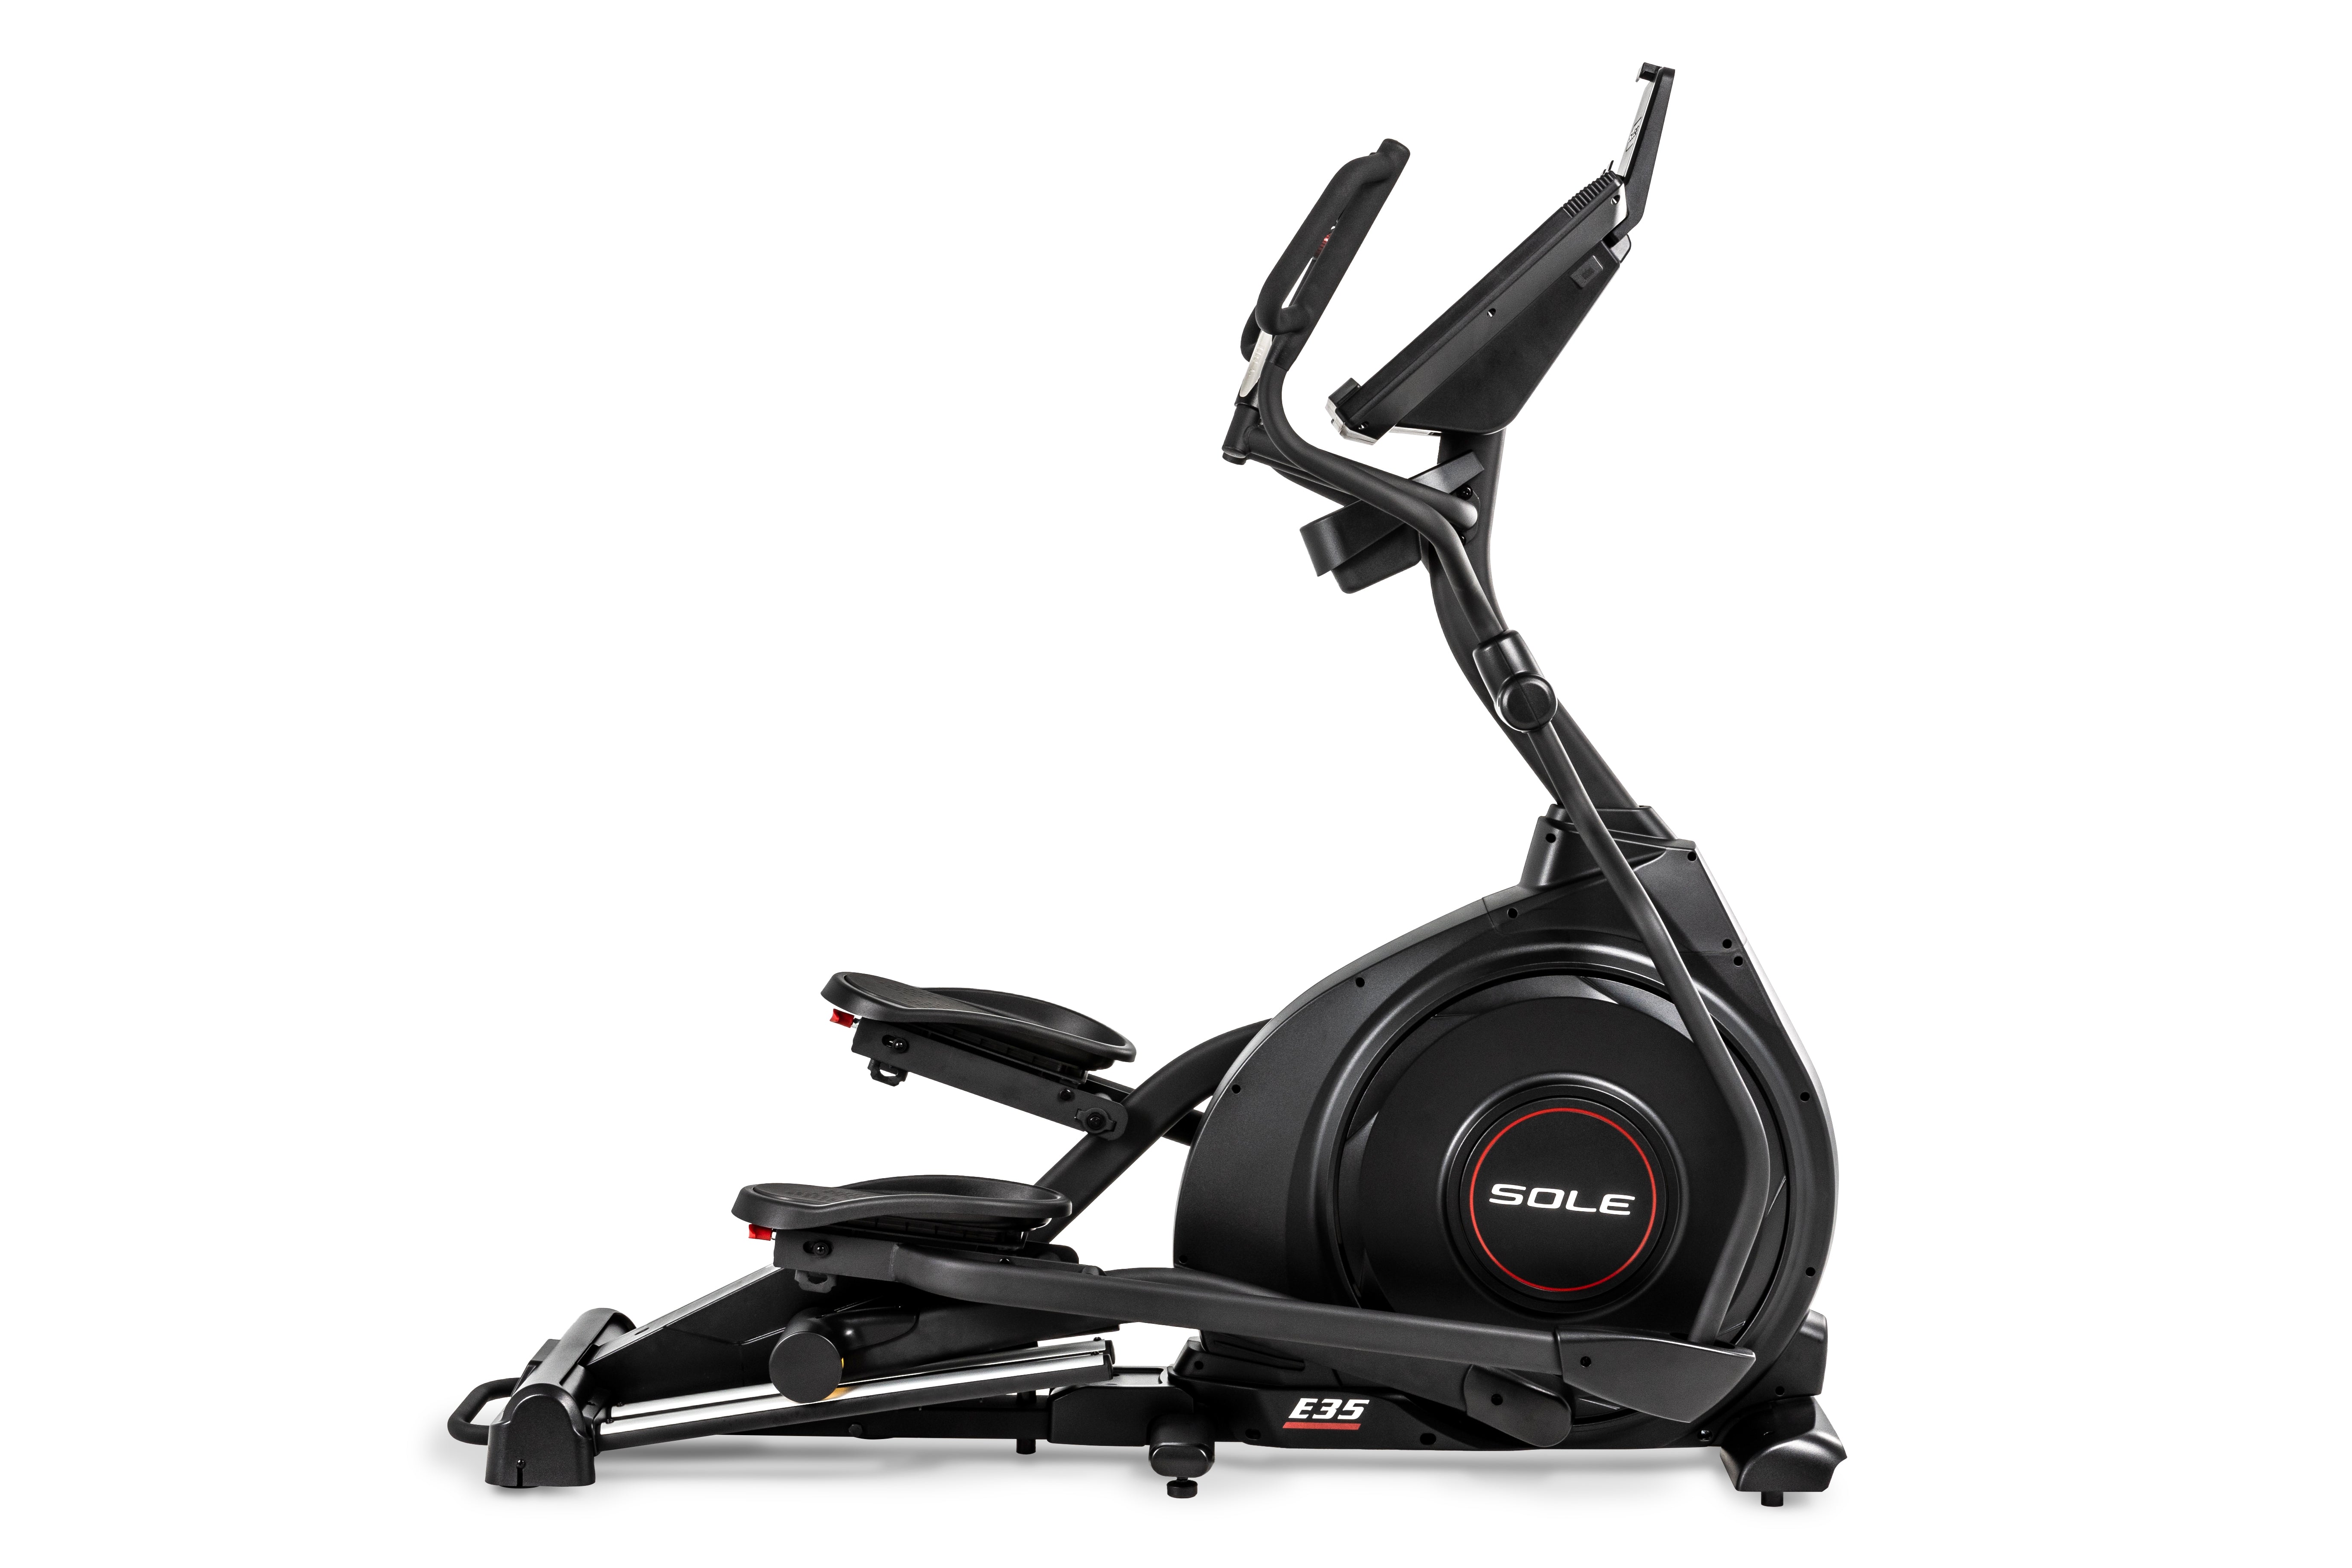 Sole E35 elliptical trainer viewed from a side angle, showcasing its sleek black design, adjustable foot pedals, 'SOLE' branding on the central flywheel, and 'E35' insignia on the lower frame.